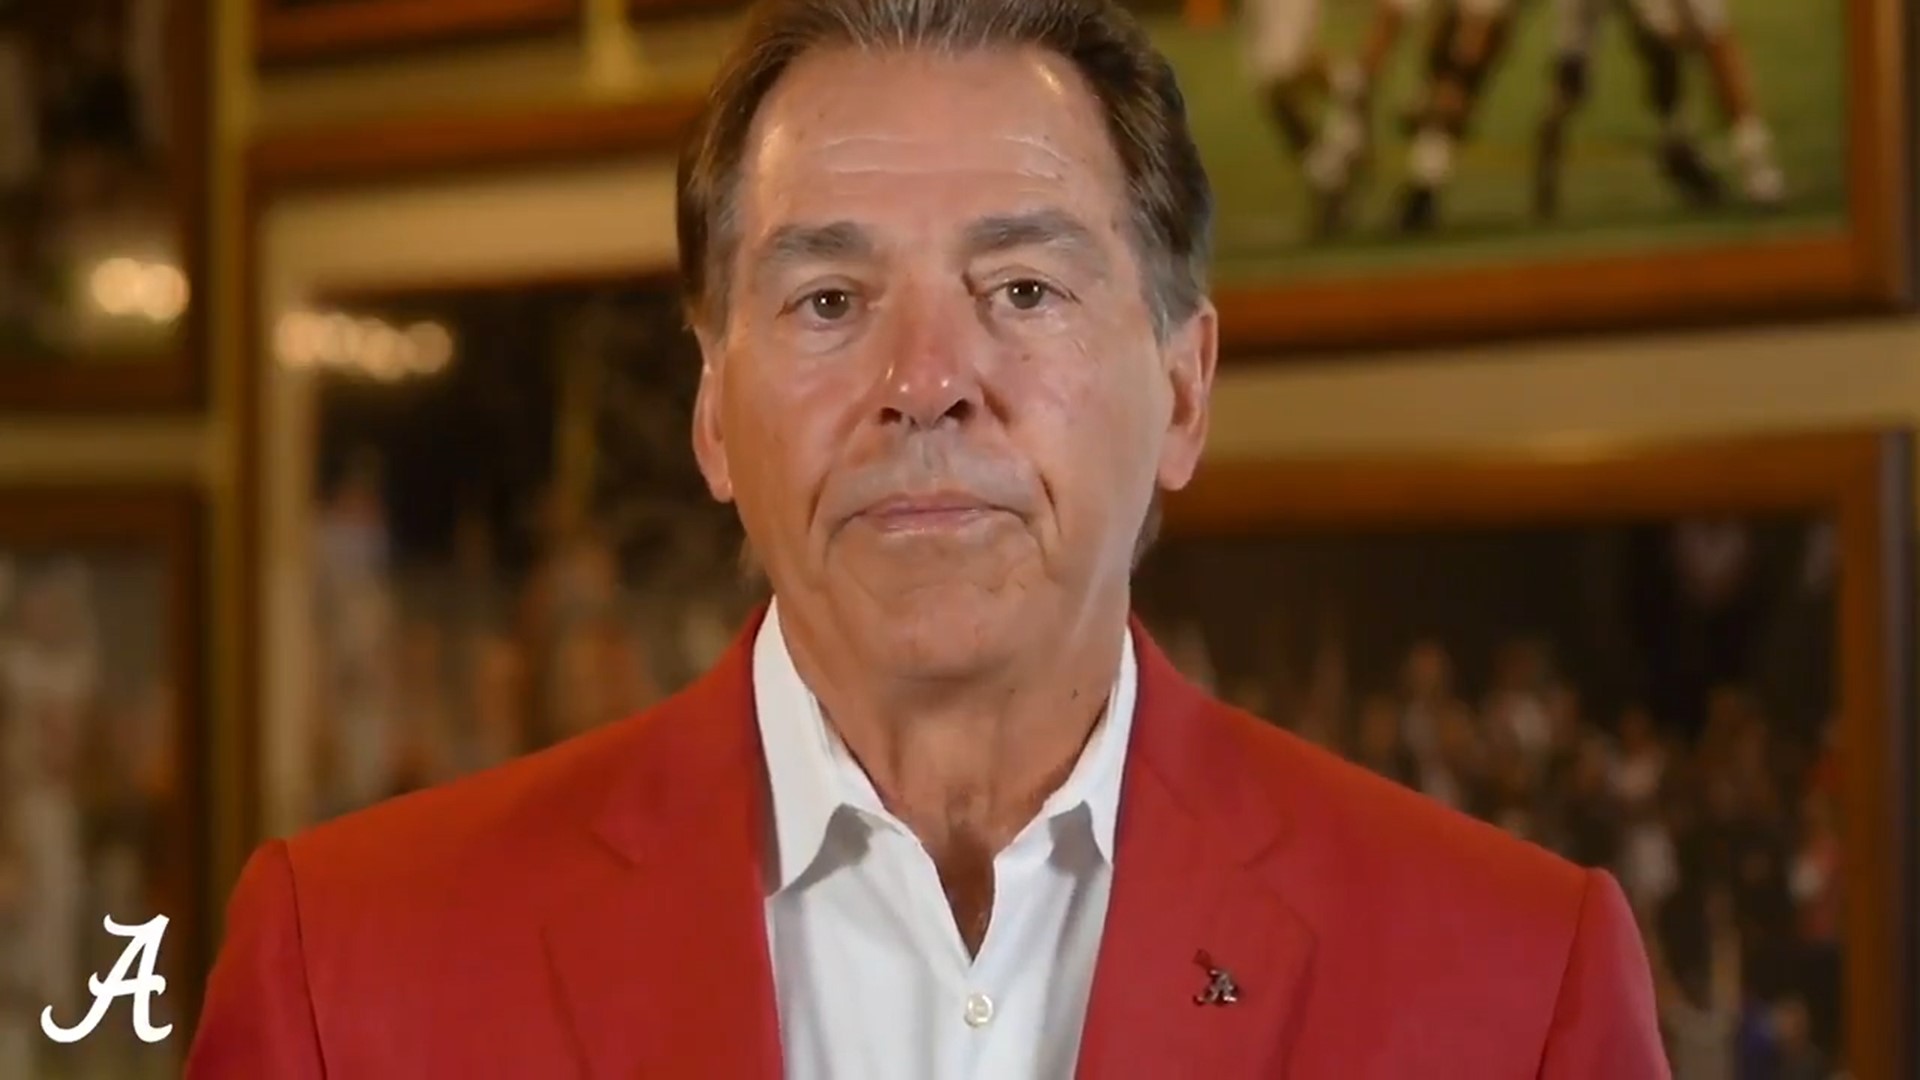 Alabama football coach Nick Saban released a video Tuesday afternoon warning fans to stay safe and healthy amidst the outbreak of COVID-19.